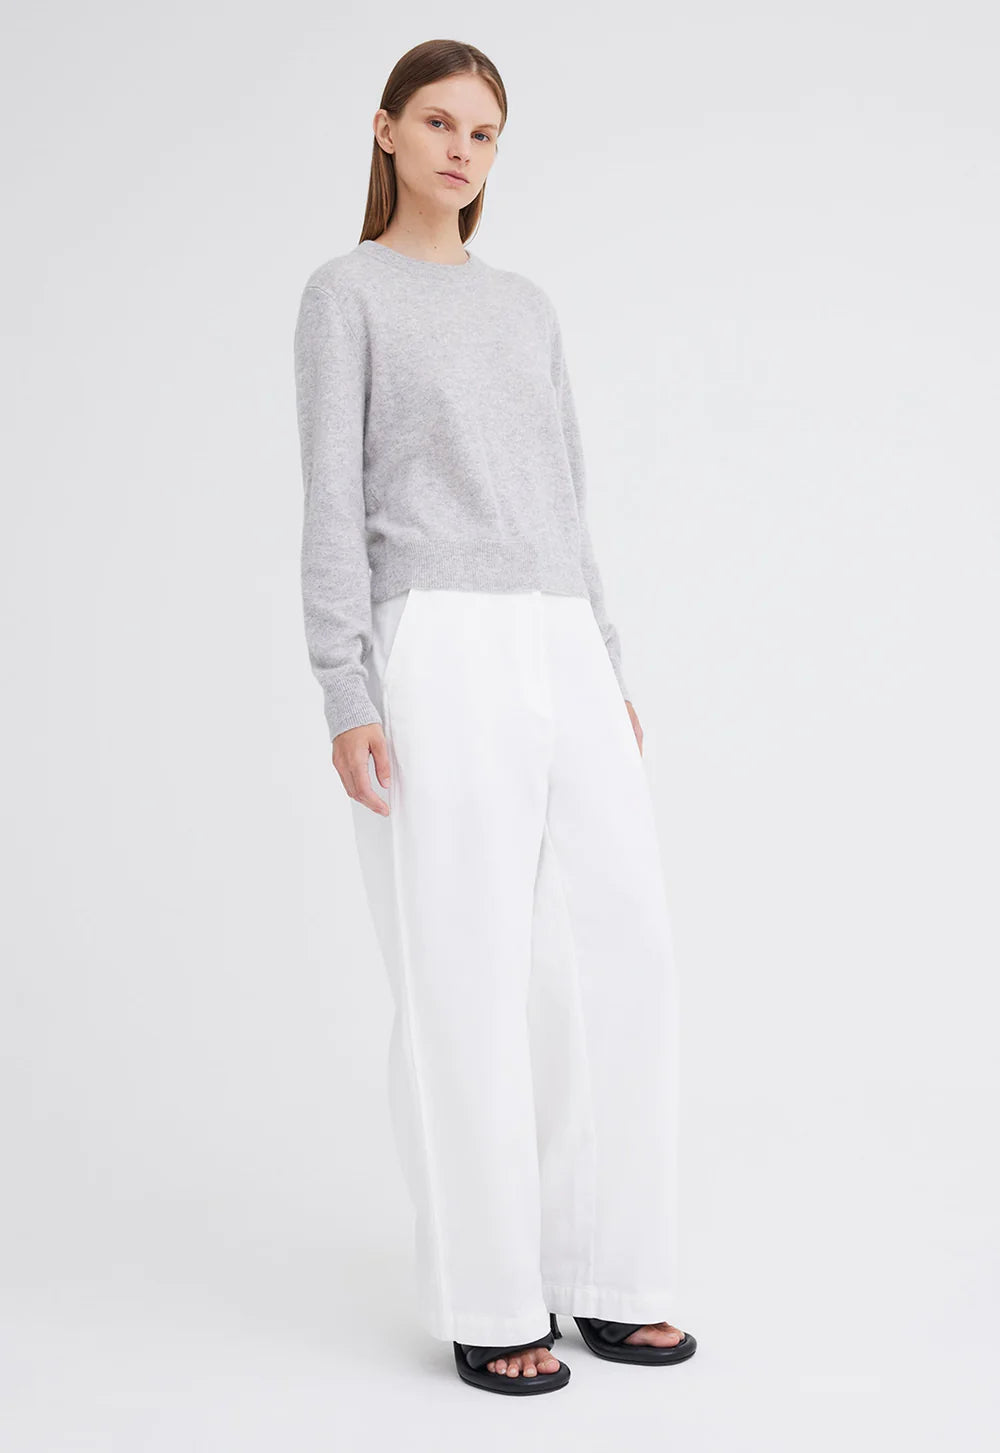 Jac + Jack Peter Cashmere Sweater - Pale Grey Marle